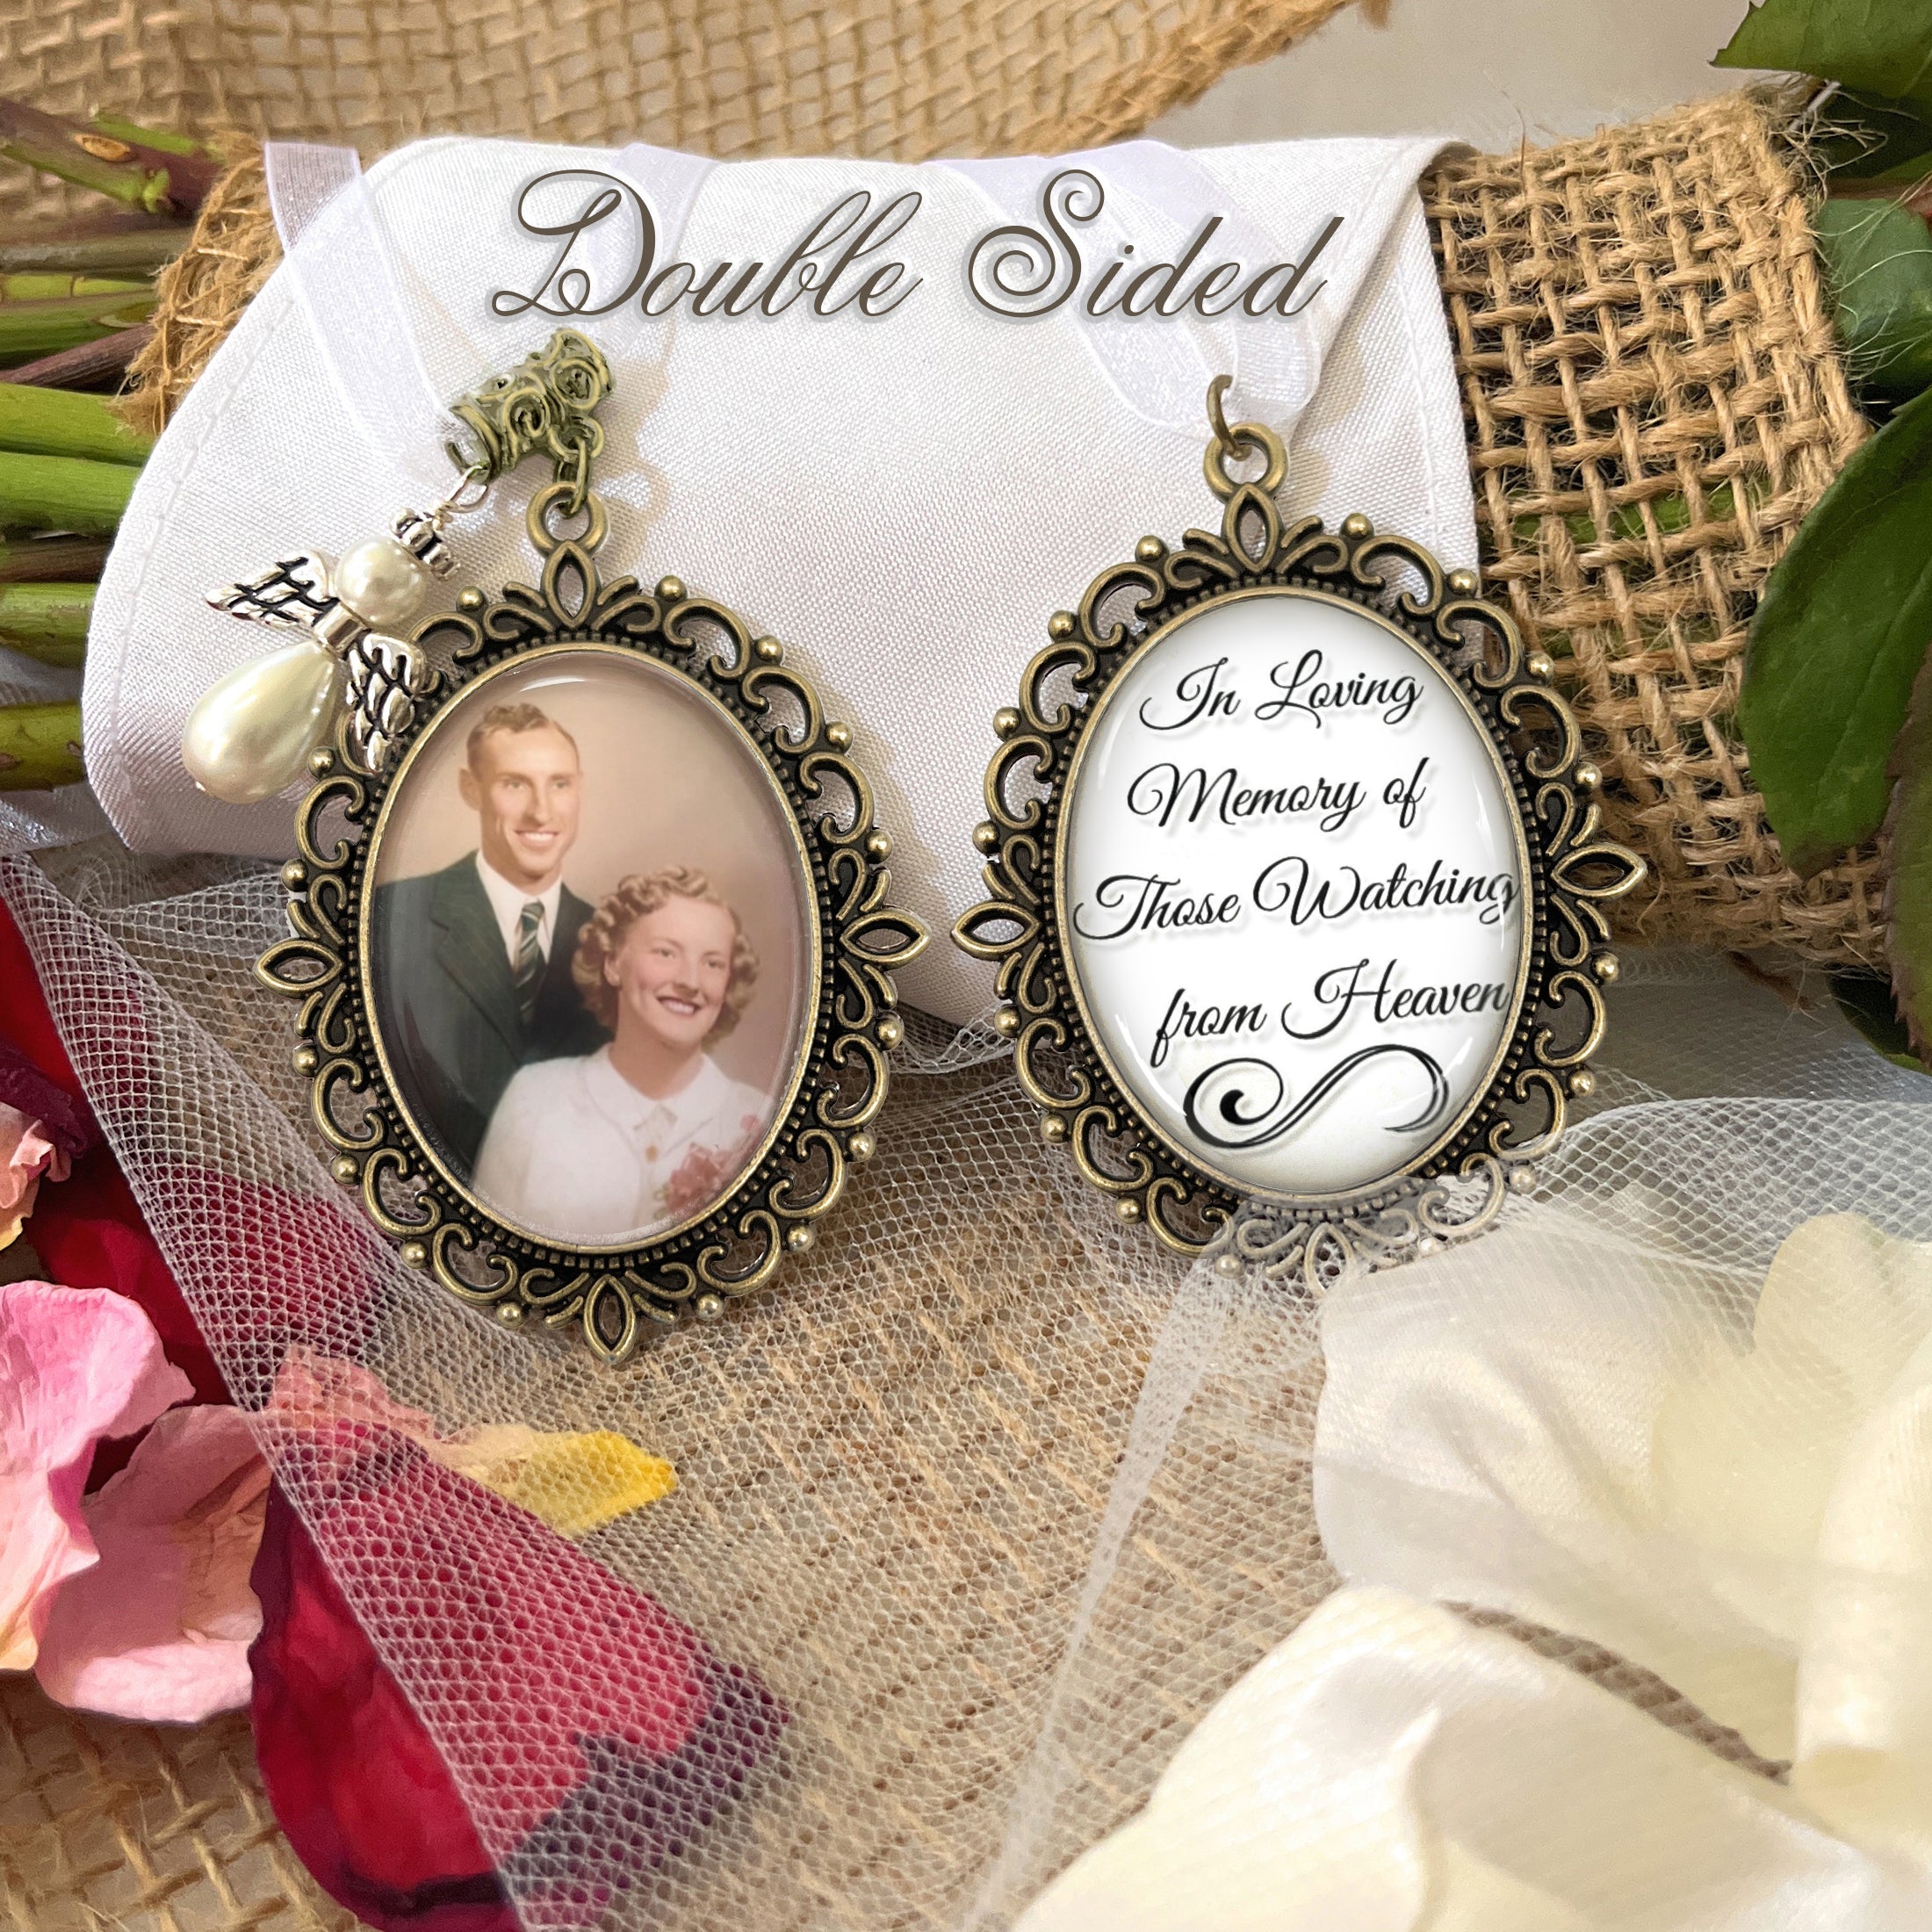 Memorial Photo Bridal Bouquet Charm-Wedding Remembrance Gift for Bride